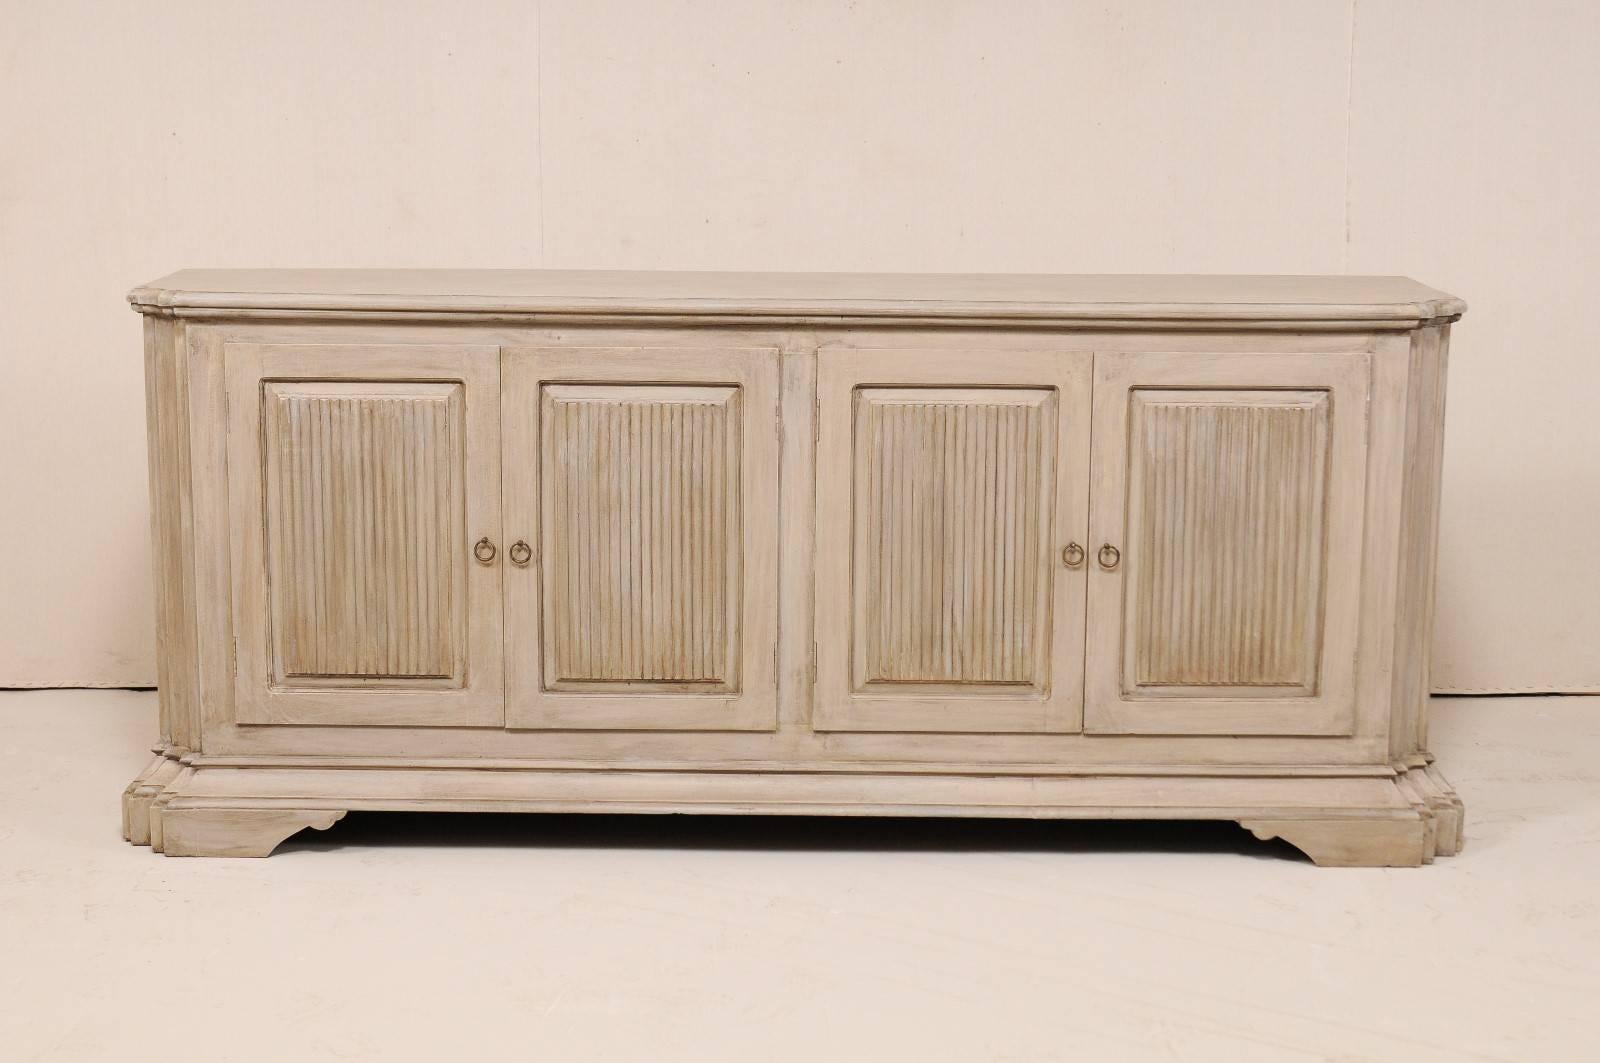 A vintage American painted wood buffet cabinet. This vintage Italian style custom buffet cabinet is over 8 feet in length and has been fashioned of old reclaimed doors and old wood. This cabinet features four reed paneled doors, nicely carved and